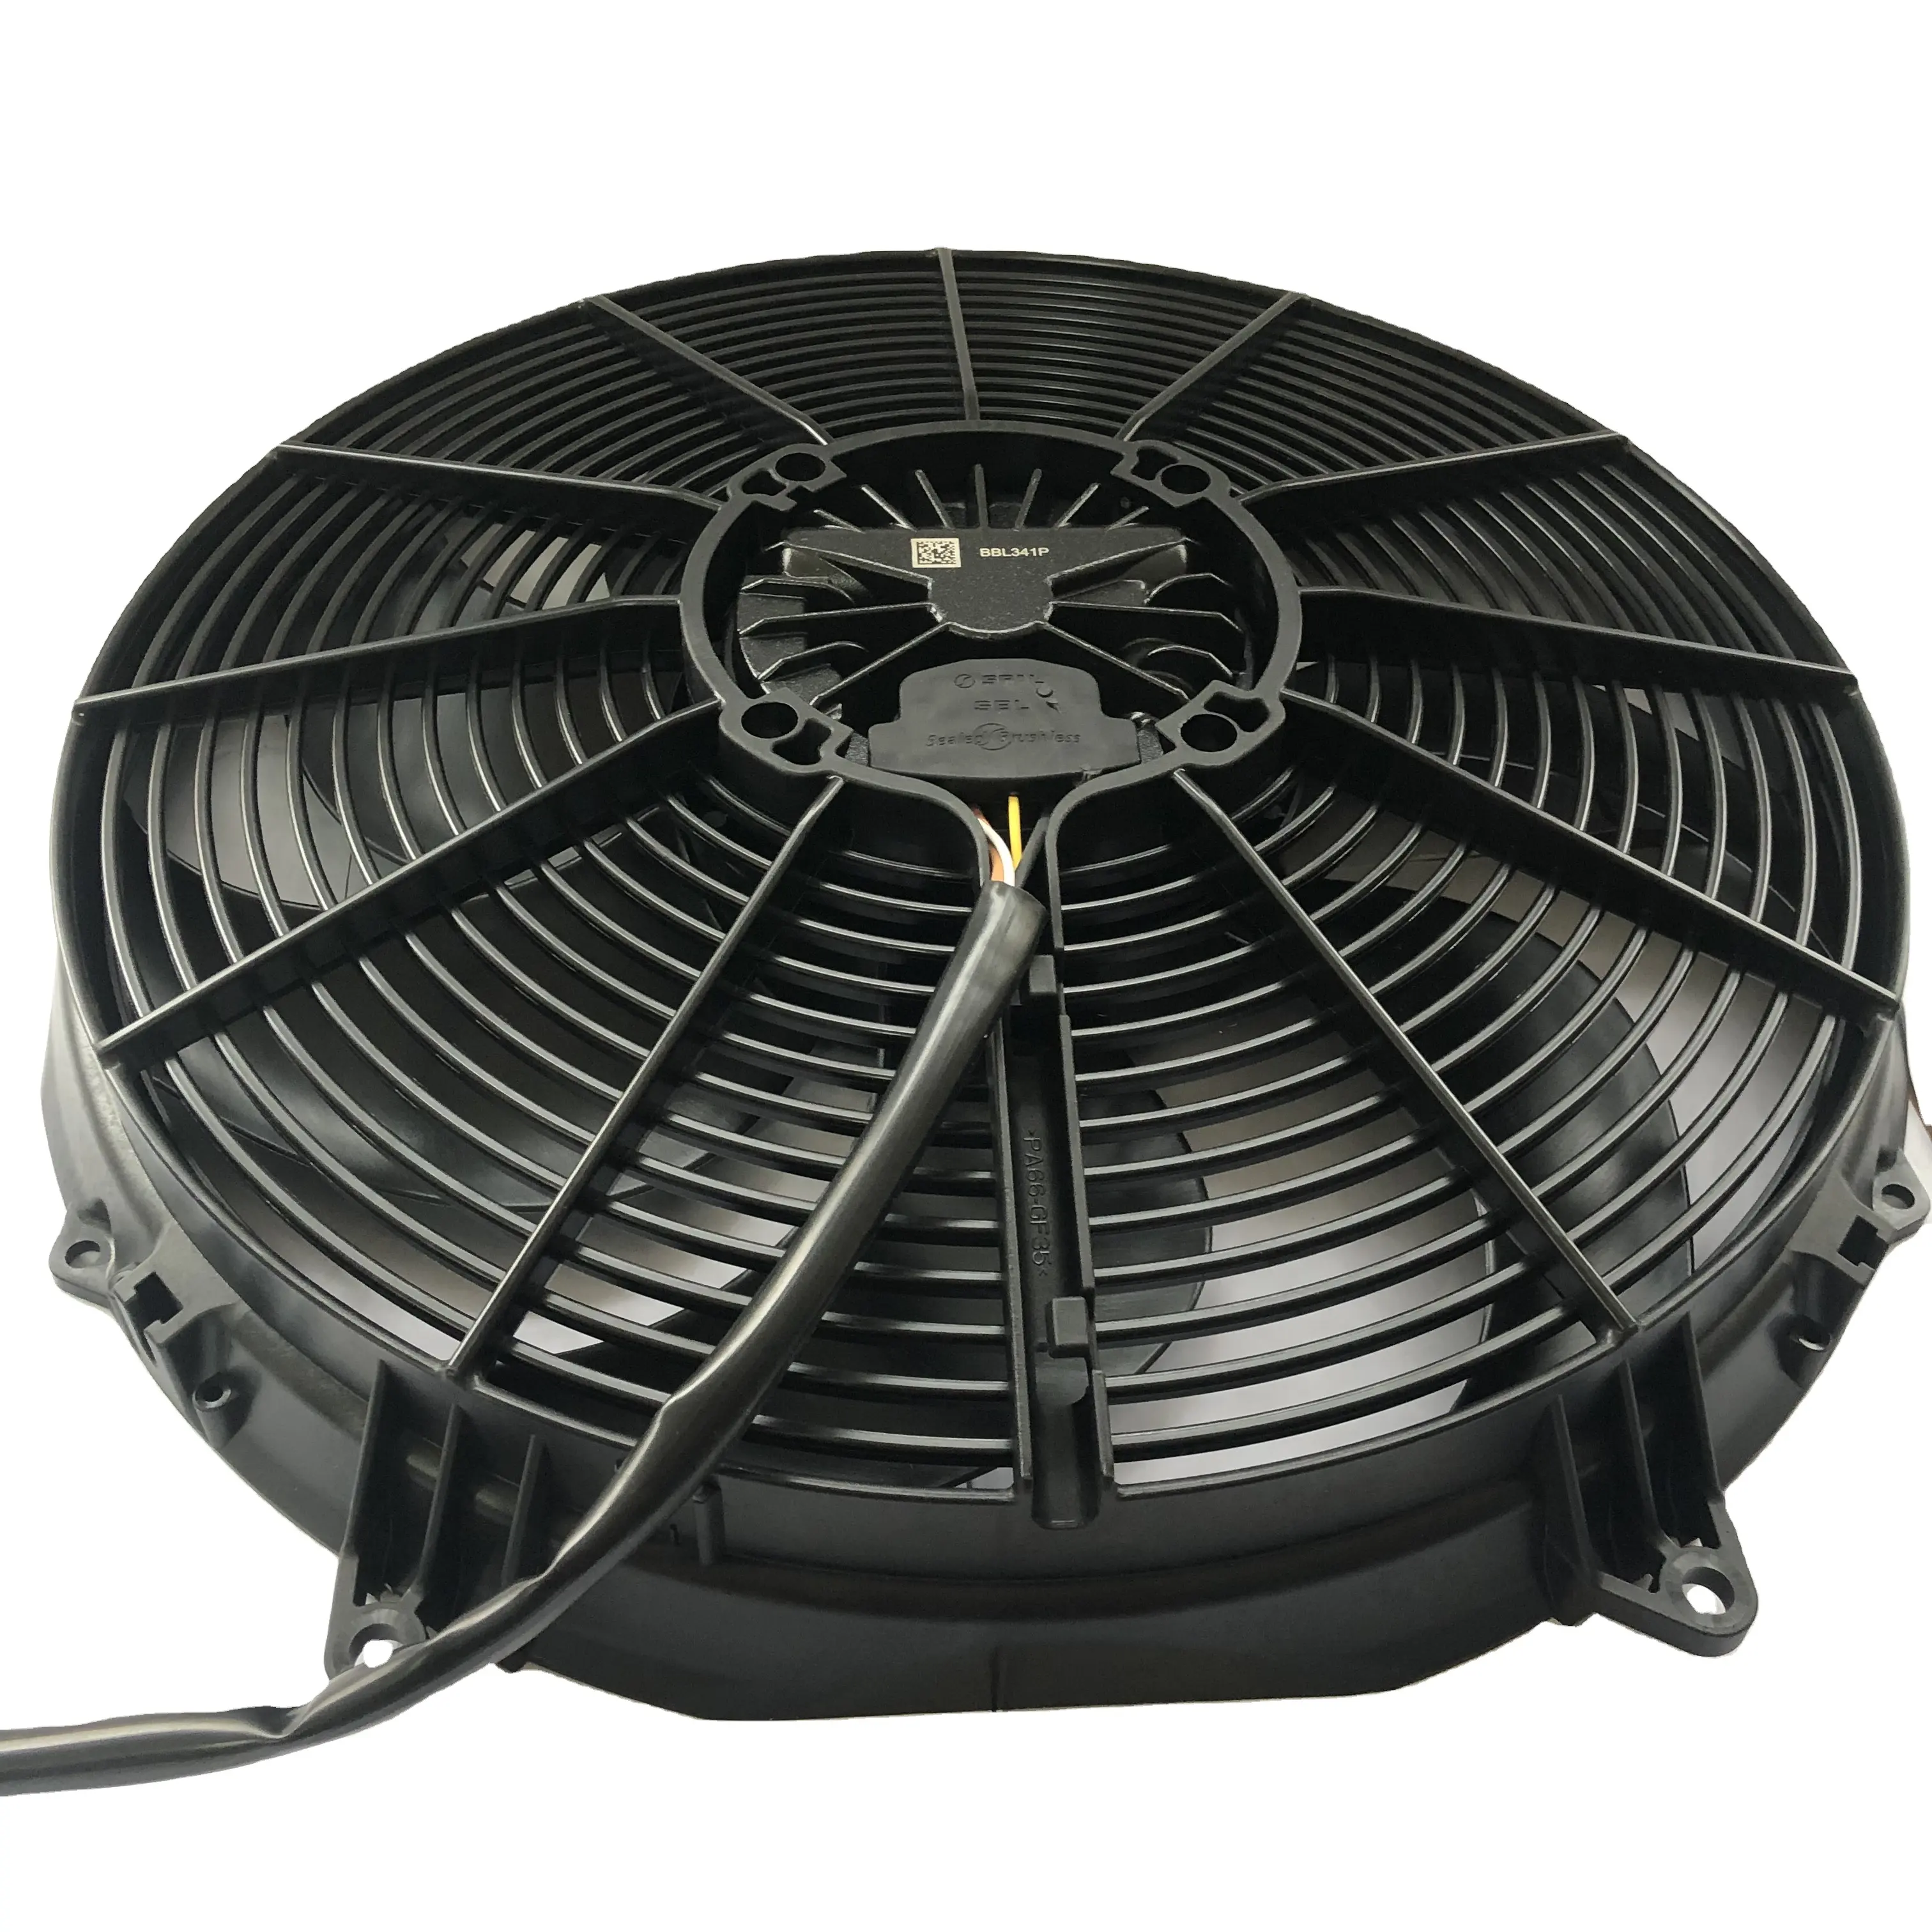 Durable good quality spal 16inch brushless axial condenser fan VA91-BBL341P/N-65A for heavy duty cooling